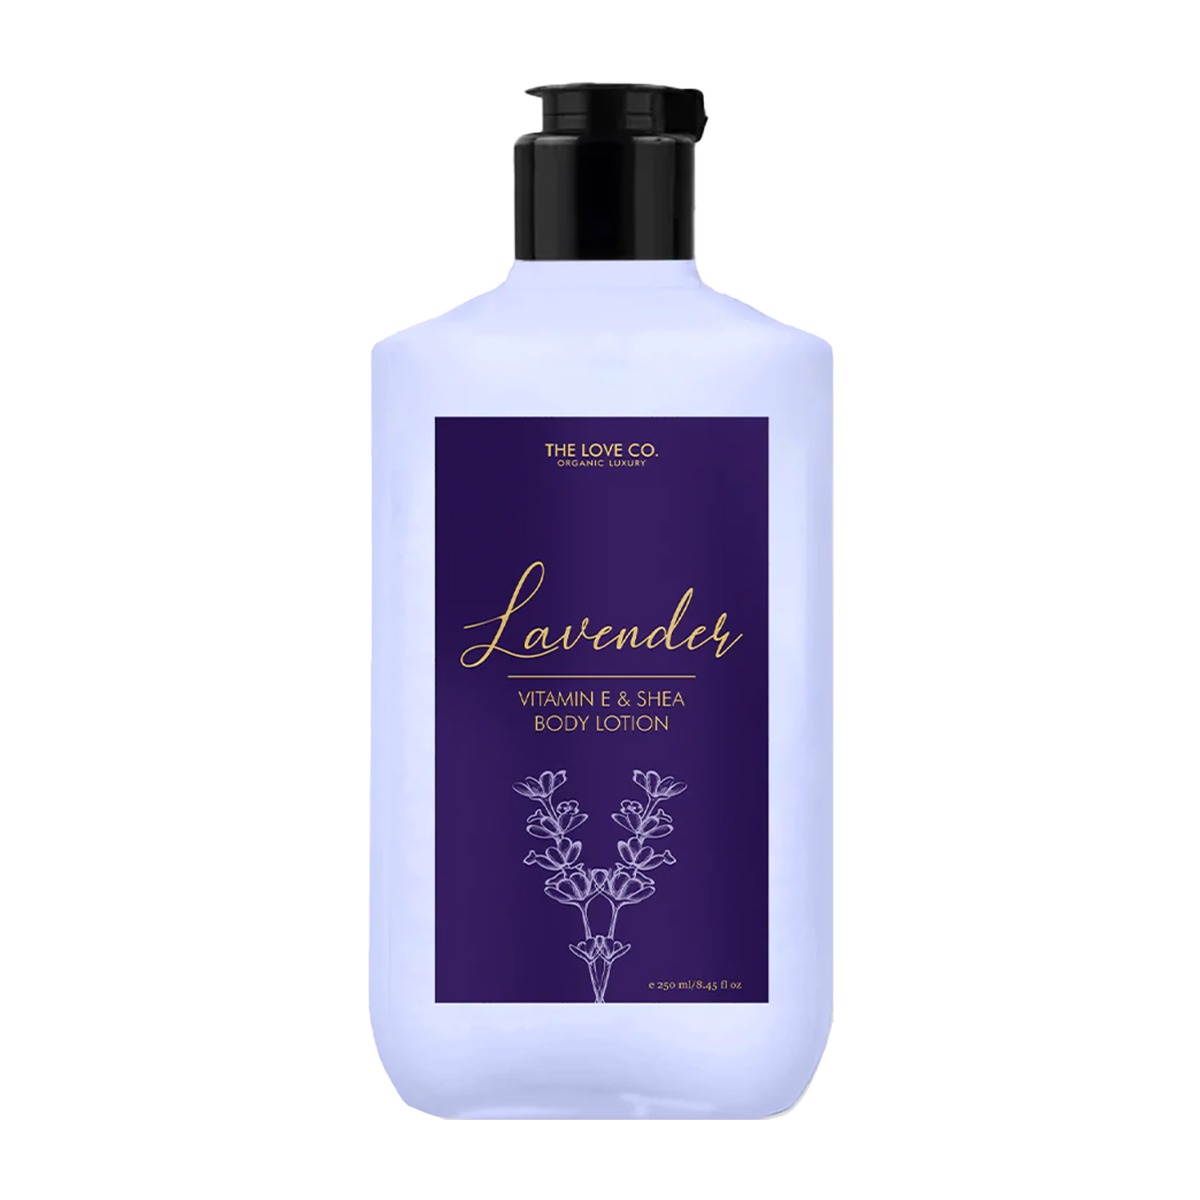 The Love Co. Lavender Body Lotion, 250ml